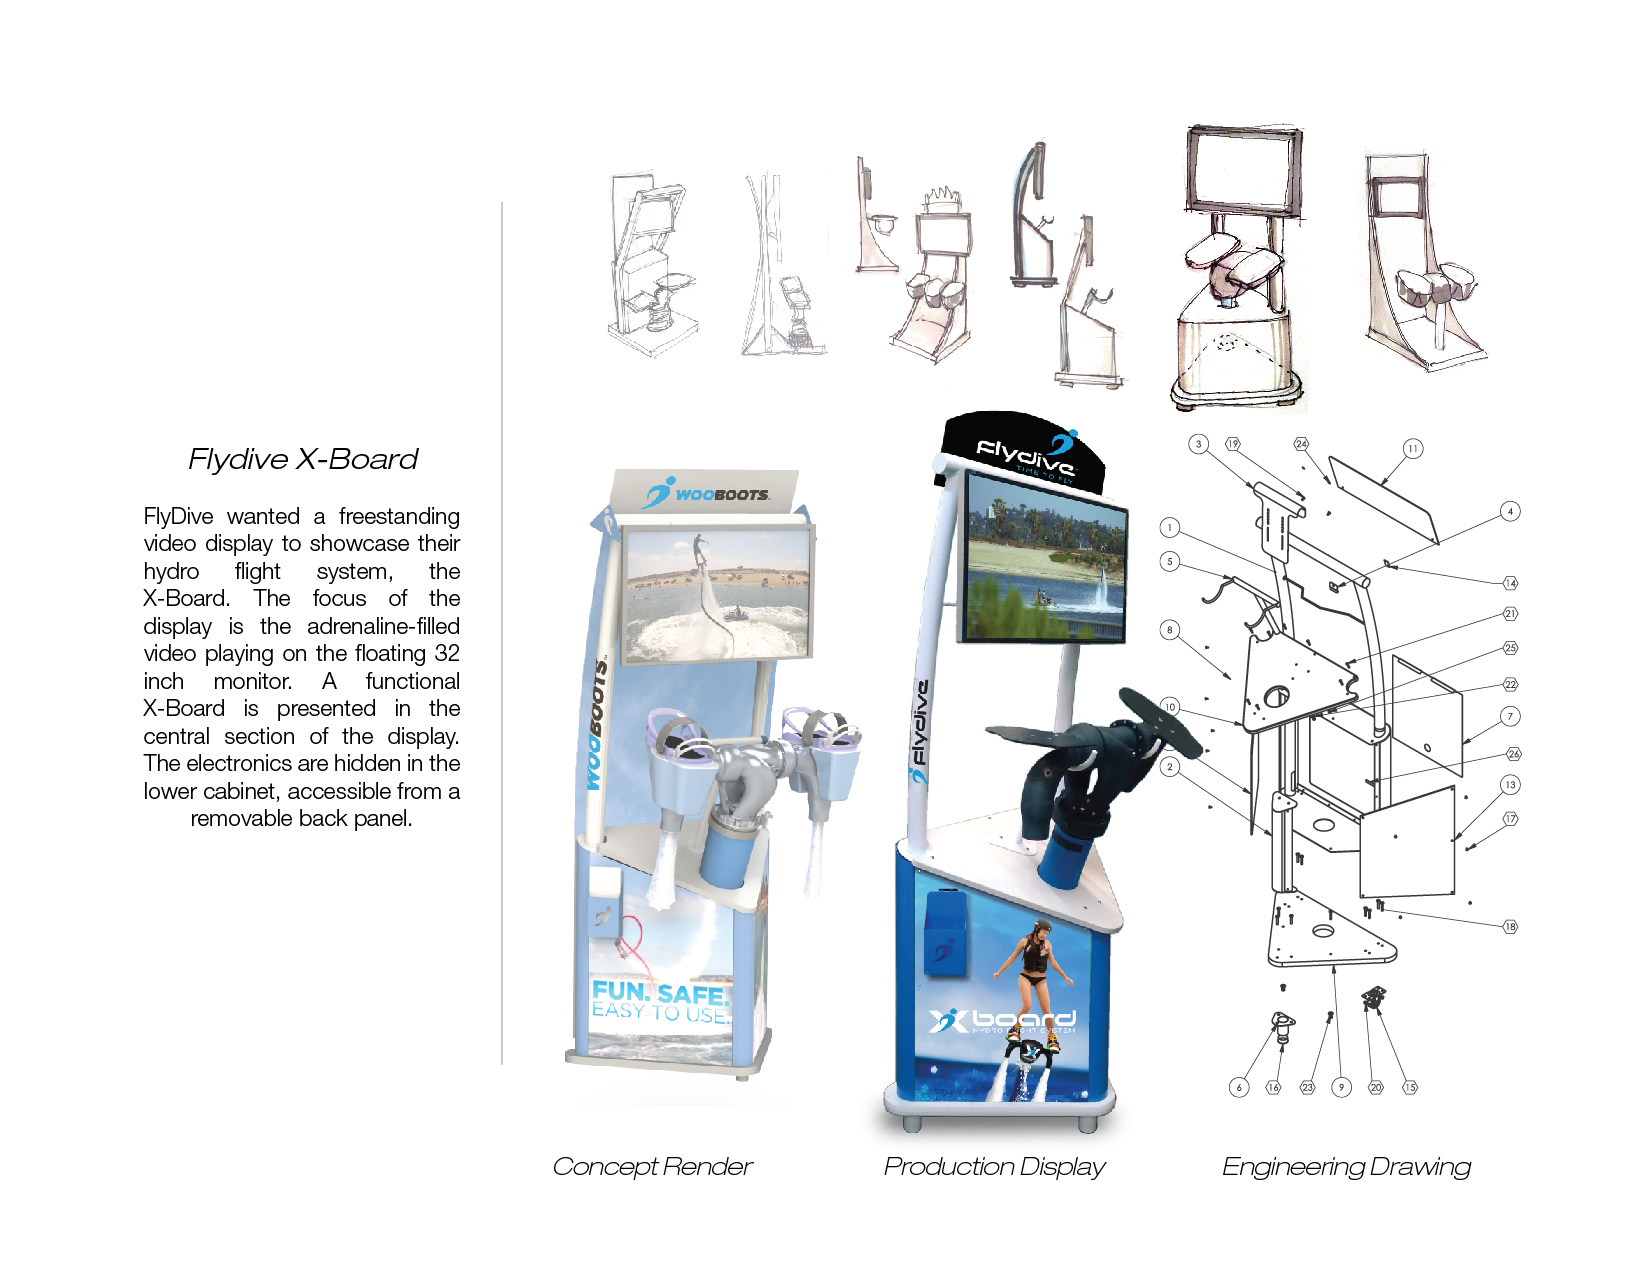  FlyDive Freestanding Display &nbsp;- concept design and engineering    